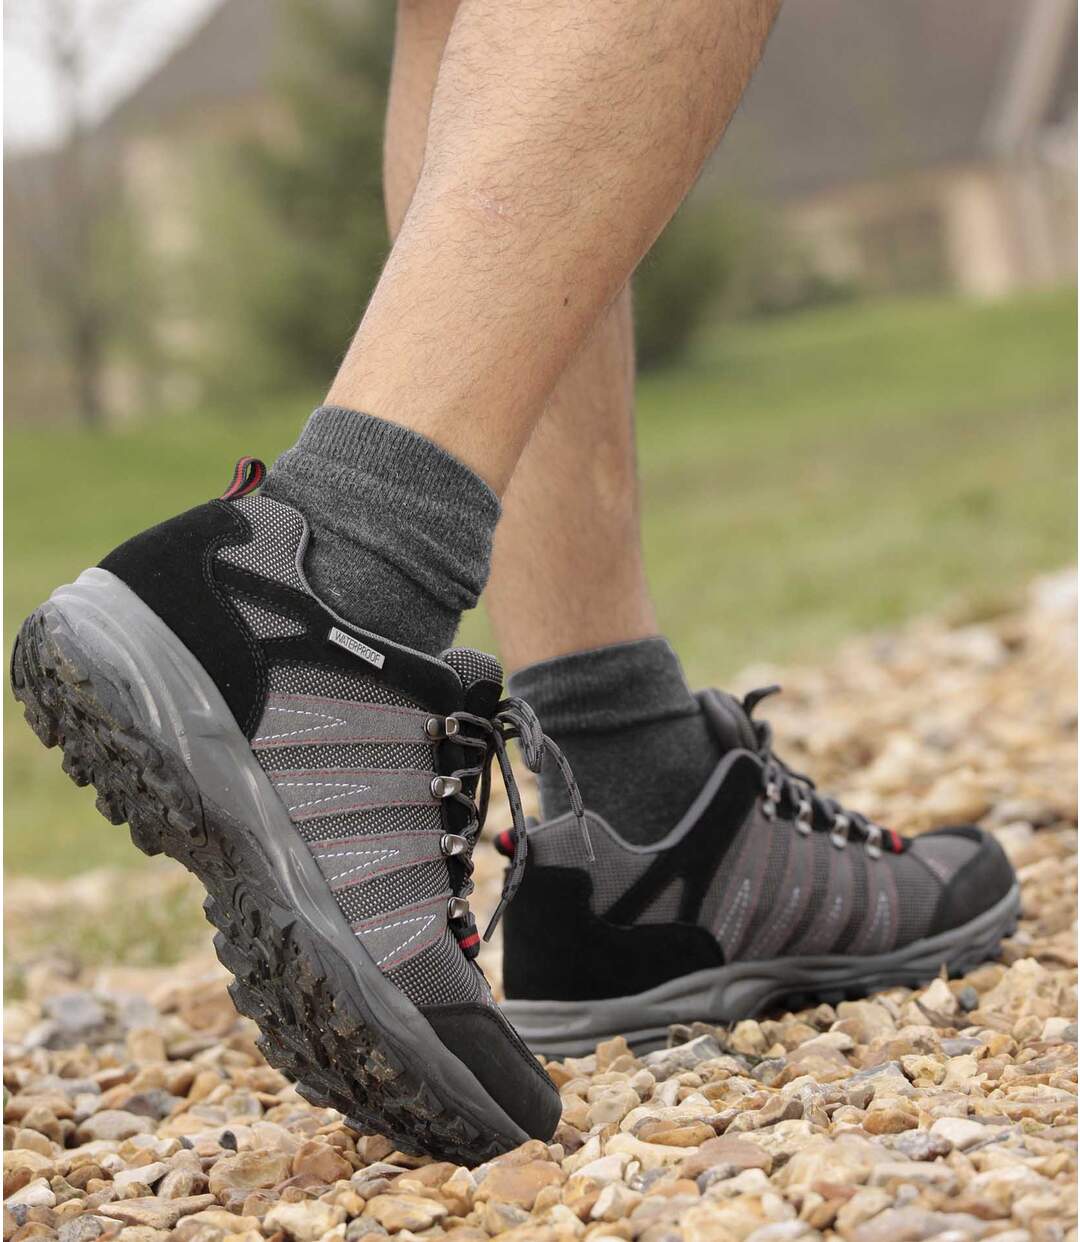 How to Choose the Best Pair of Walking Boots | Buying Guide | Atlas For Men